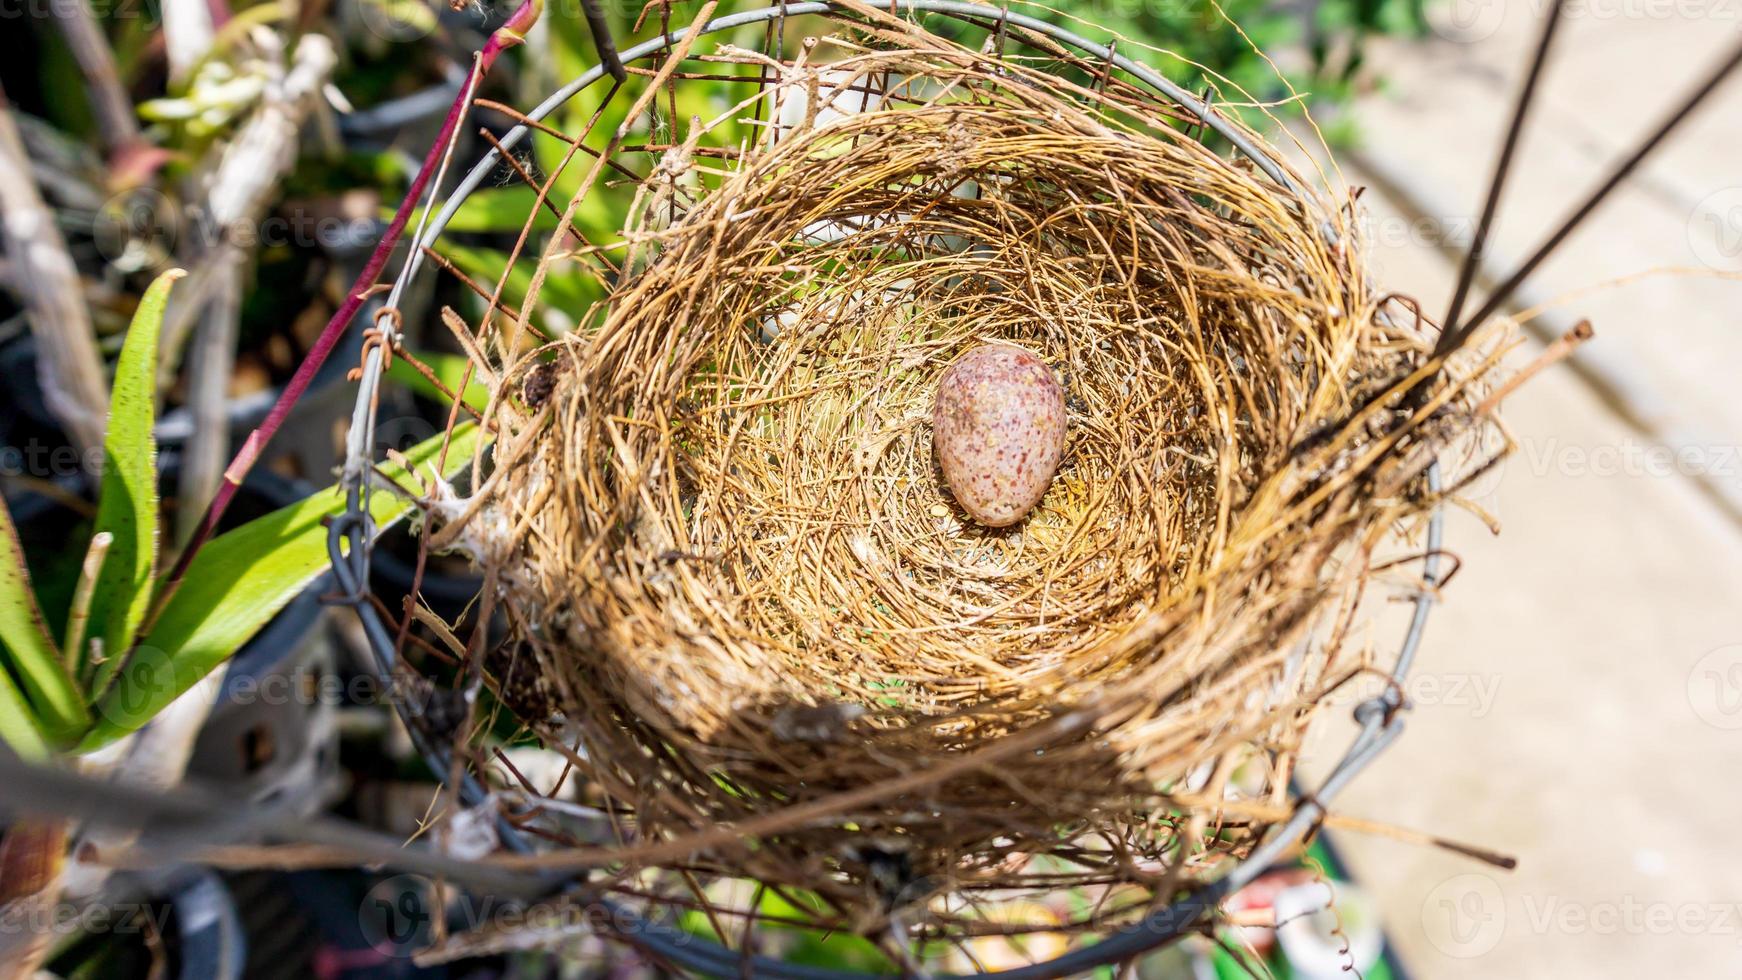 Red vented Bulbul eggs in nest before hatching in a domestic bird feeder photo